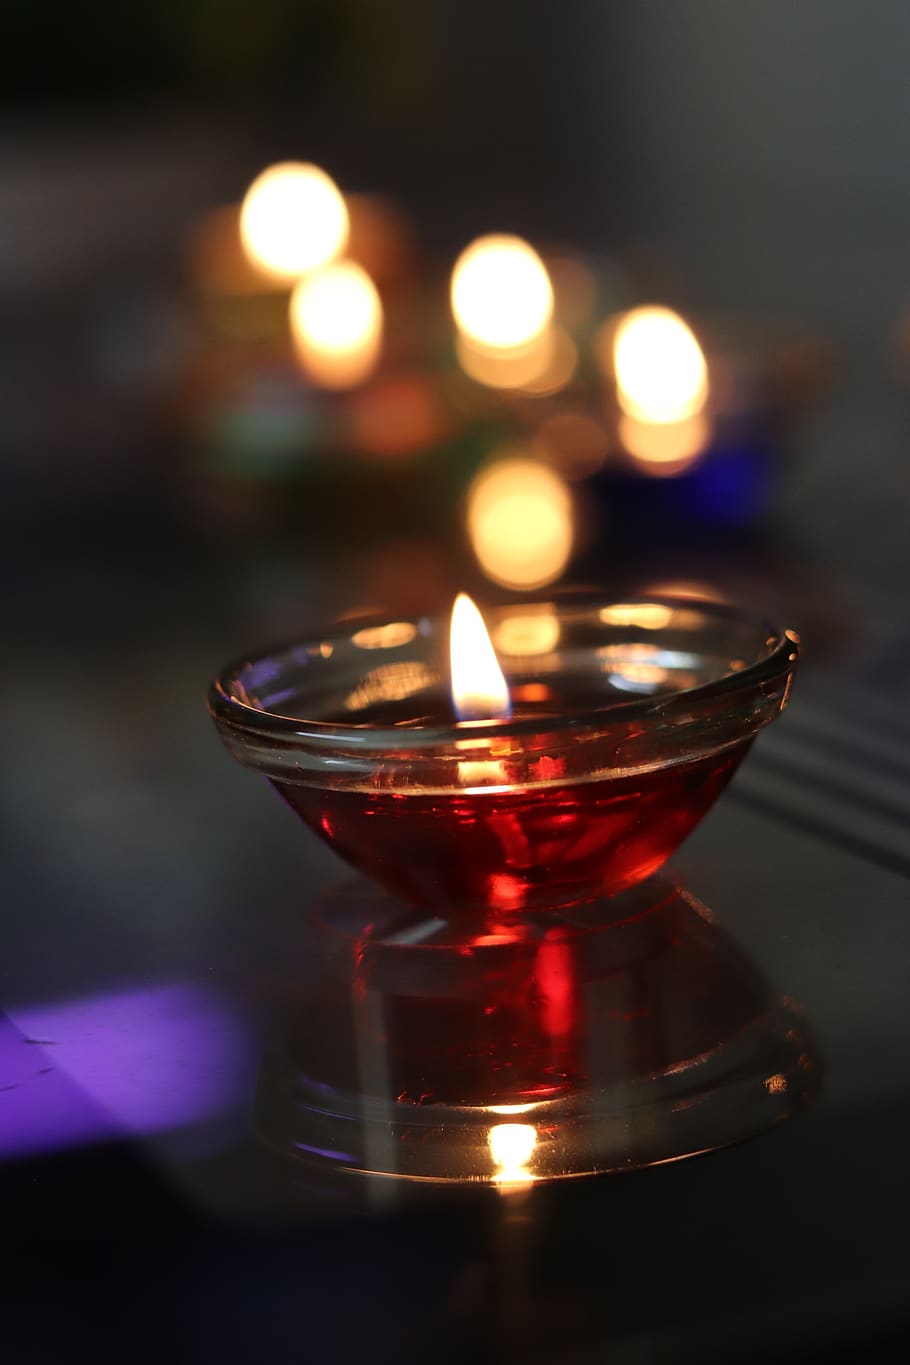 HD wallpaper: diwali, candle, candlelight, candle design, flame ...